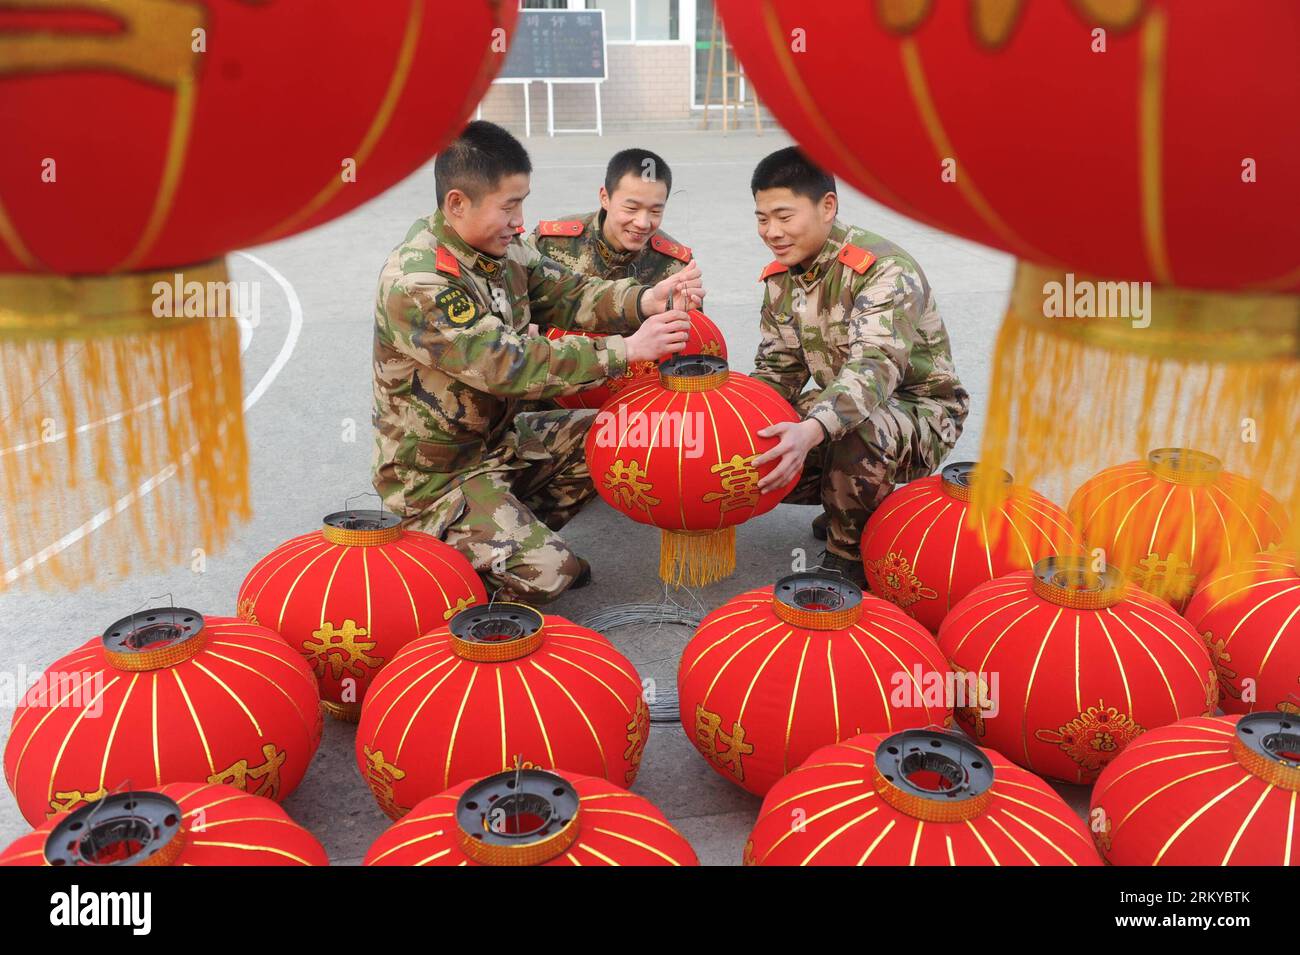 Bildnummer: 59191617  Datum: 08.02.2013  Copyright: imago/Xinhua (130208) -- FUYANG, Feb. 8, 2013 (Xinhua) -- Soldiers prepare red lanterns to decorate their barrack for the coming Spring Festival in Fuyang City, east China s Anhui Province, Feb. 8, 2013. The Spring Festival, the most important occasion for the family reunion for the Chinese people, falls on the first day of the first month of the traditional Chinese lunar calendar, or Feb. 10 this year. (Xinhua/Wang Biao)(wjq) CHINA-SPRING FESTIVAL-CELEBRATION (CN) PUBLICATIONxNOTxINxCHN Kultur Gesellschaft chinesisches Neujahr Vorbeitungen x Stock Photo